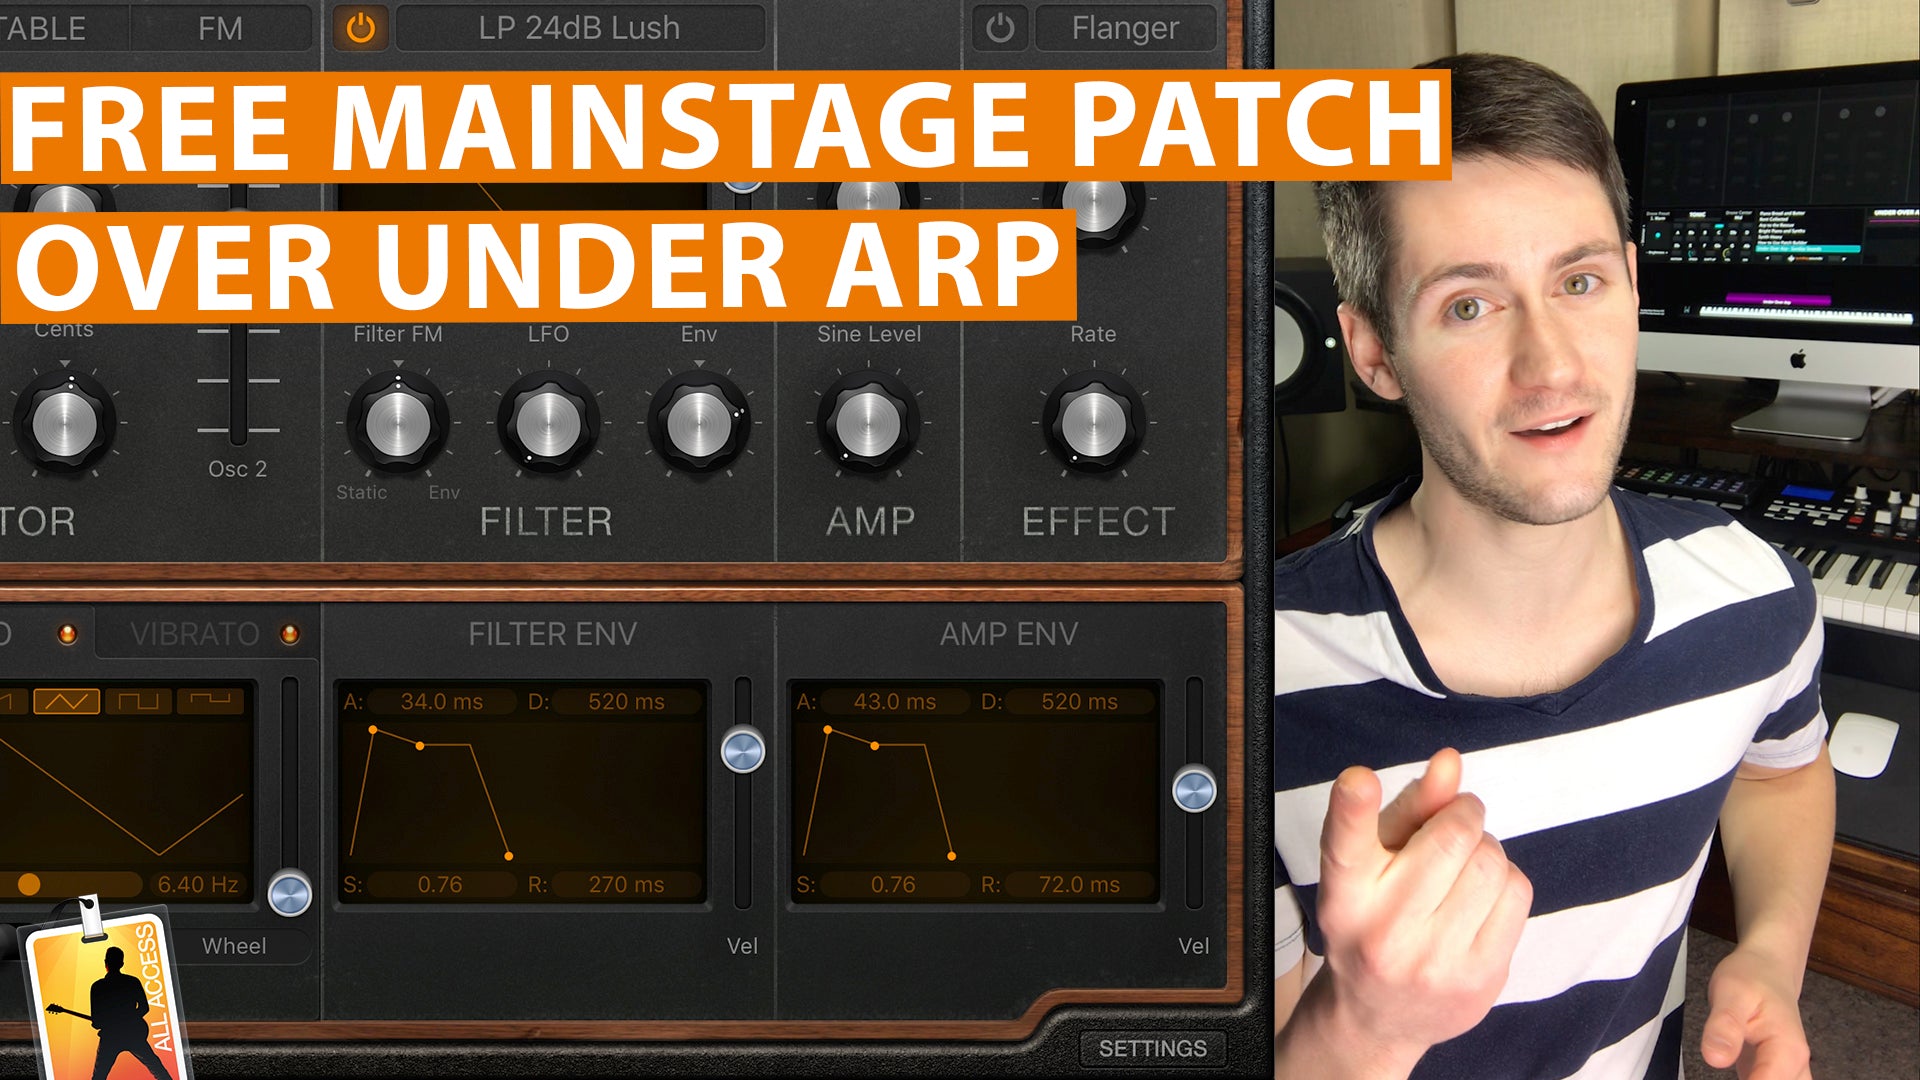 Free MainStage Worship Patch! - Under Over Arp